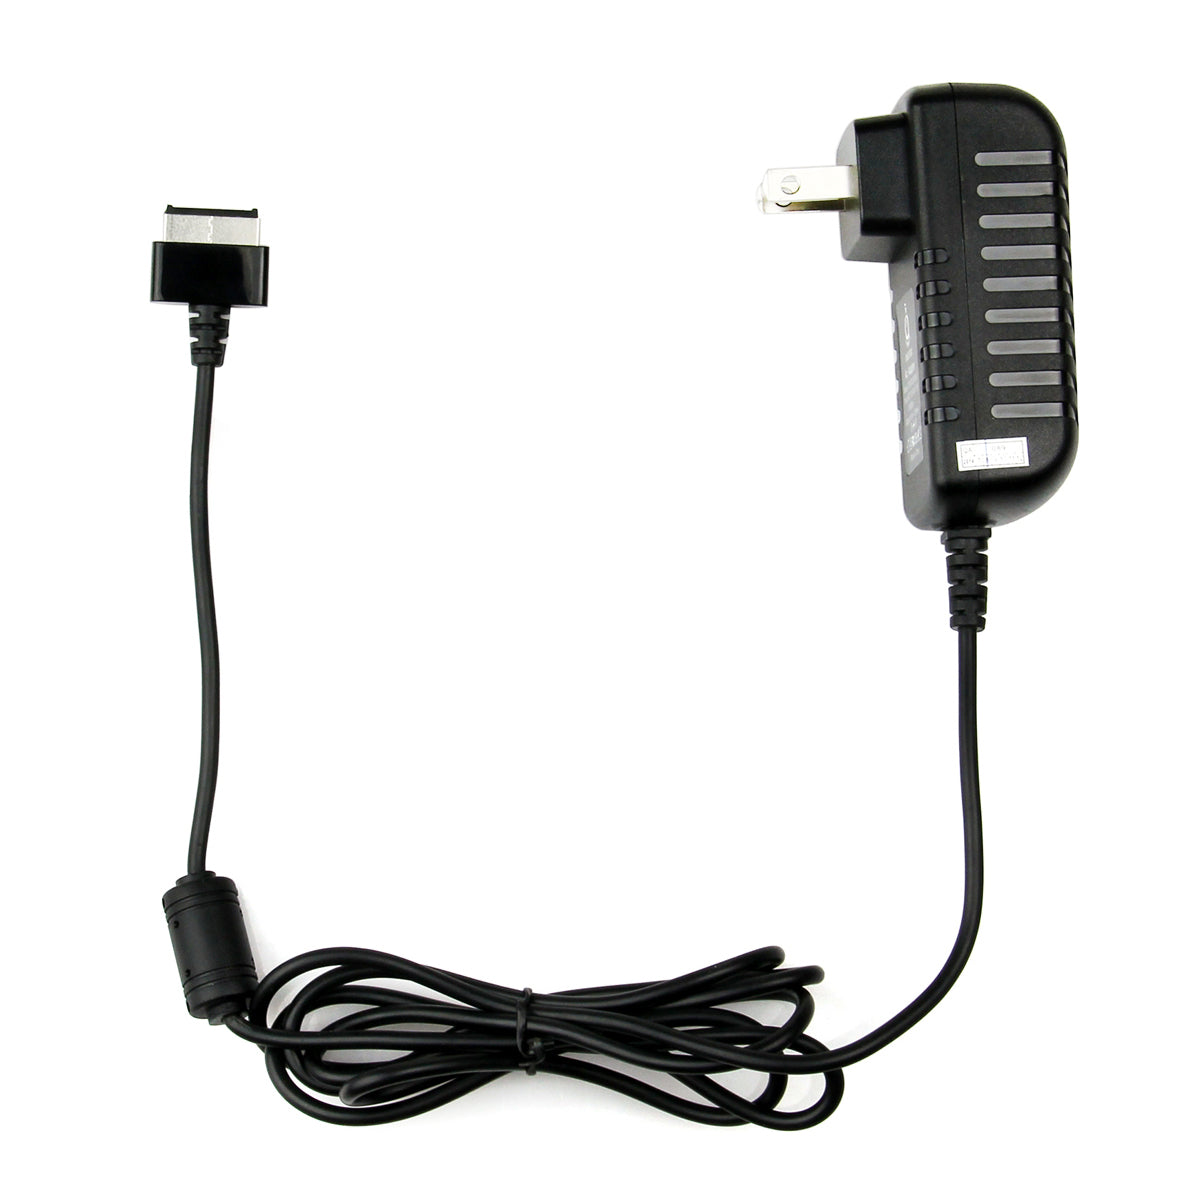 AC Adapter Charger for ASUS TF300T-A1-CG Eee Pad.